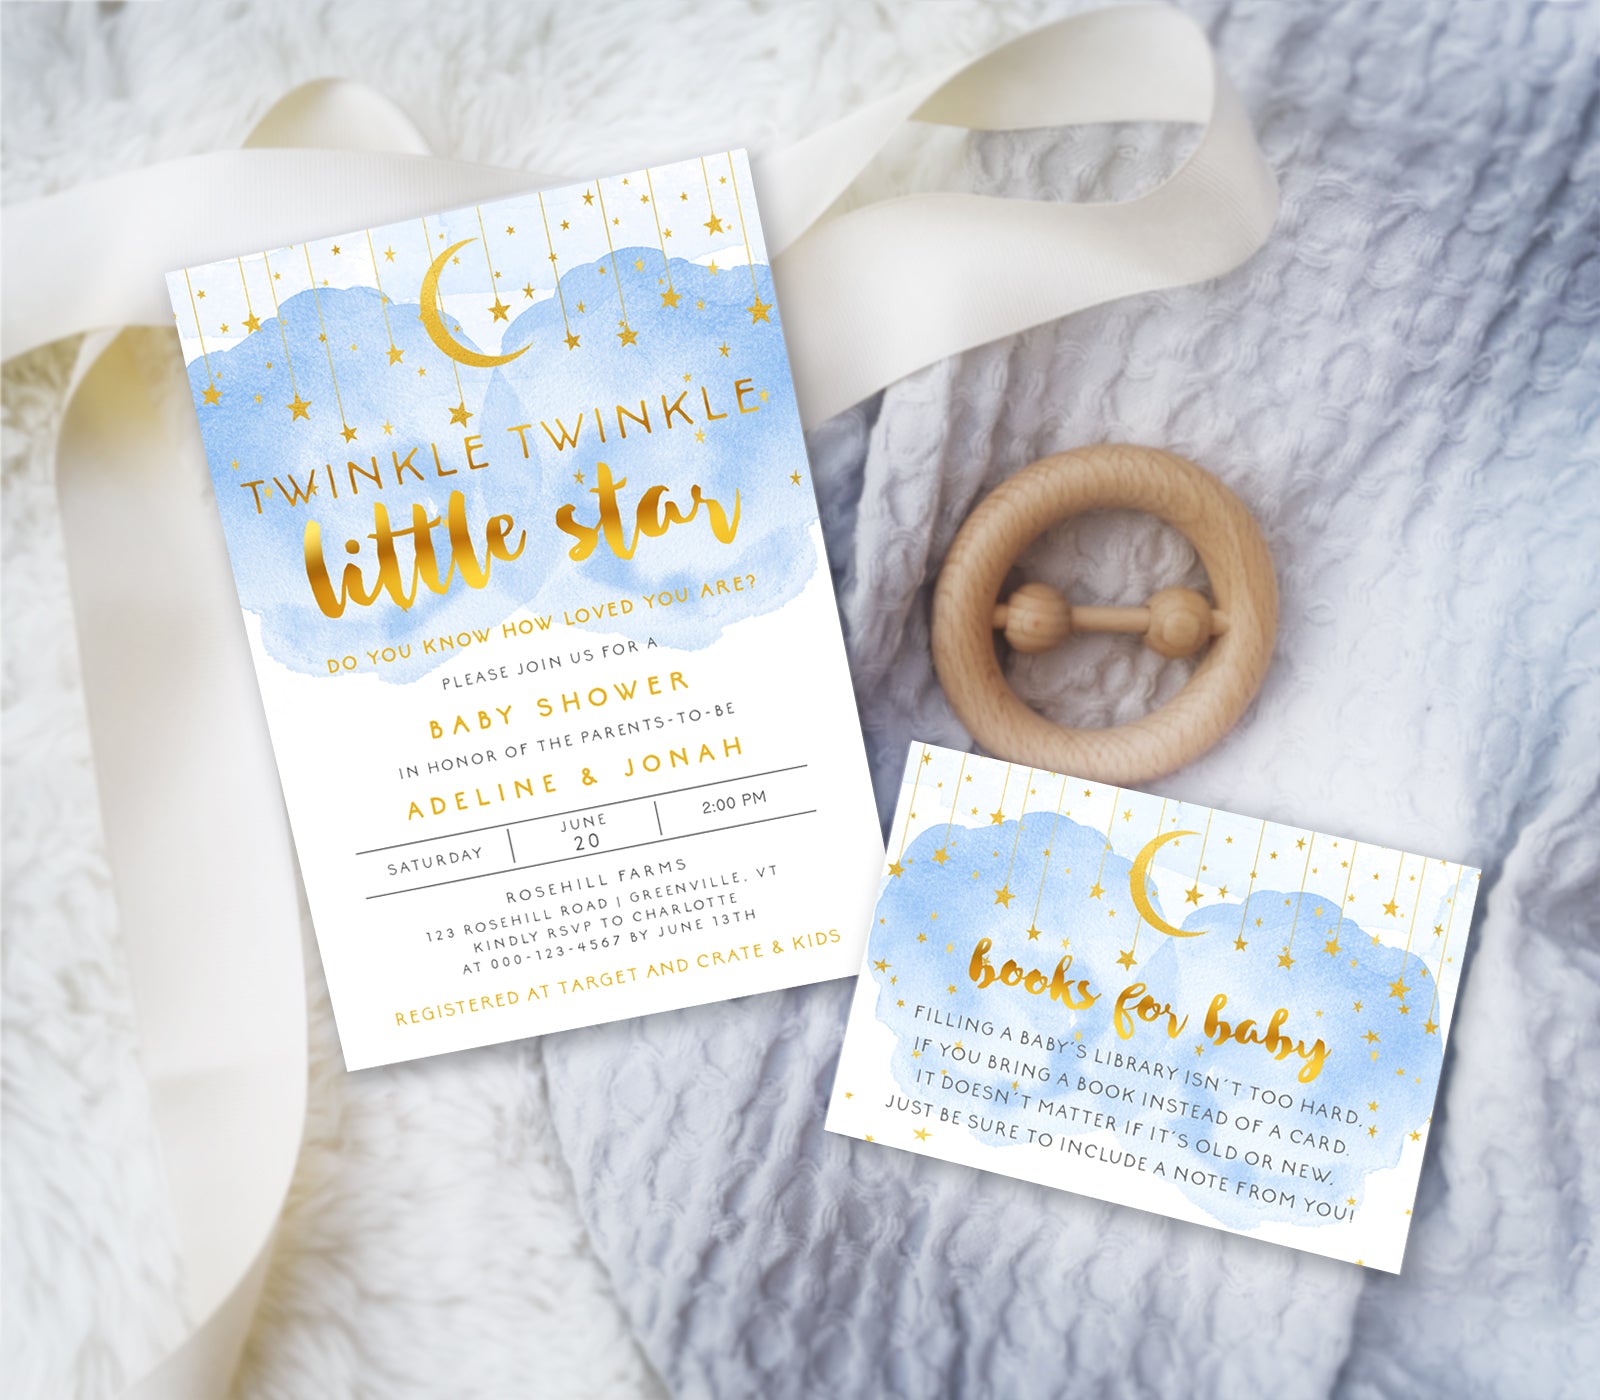 Twinkle twinkle little star 5 x 7 inch baby shower invitation and 5 x 3.5 inch books for baby card with blue smoke, gold moon and stars, gold script text from Artful Life Designs